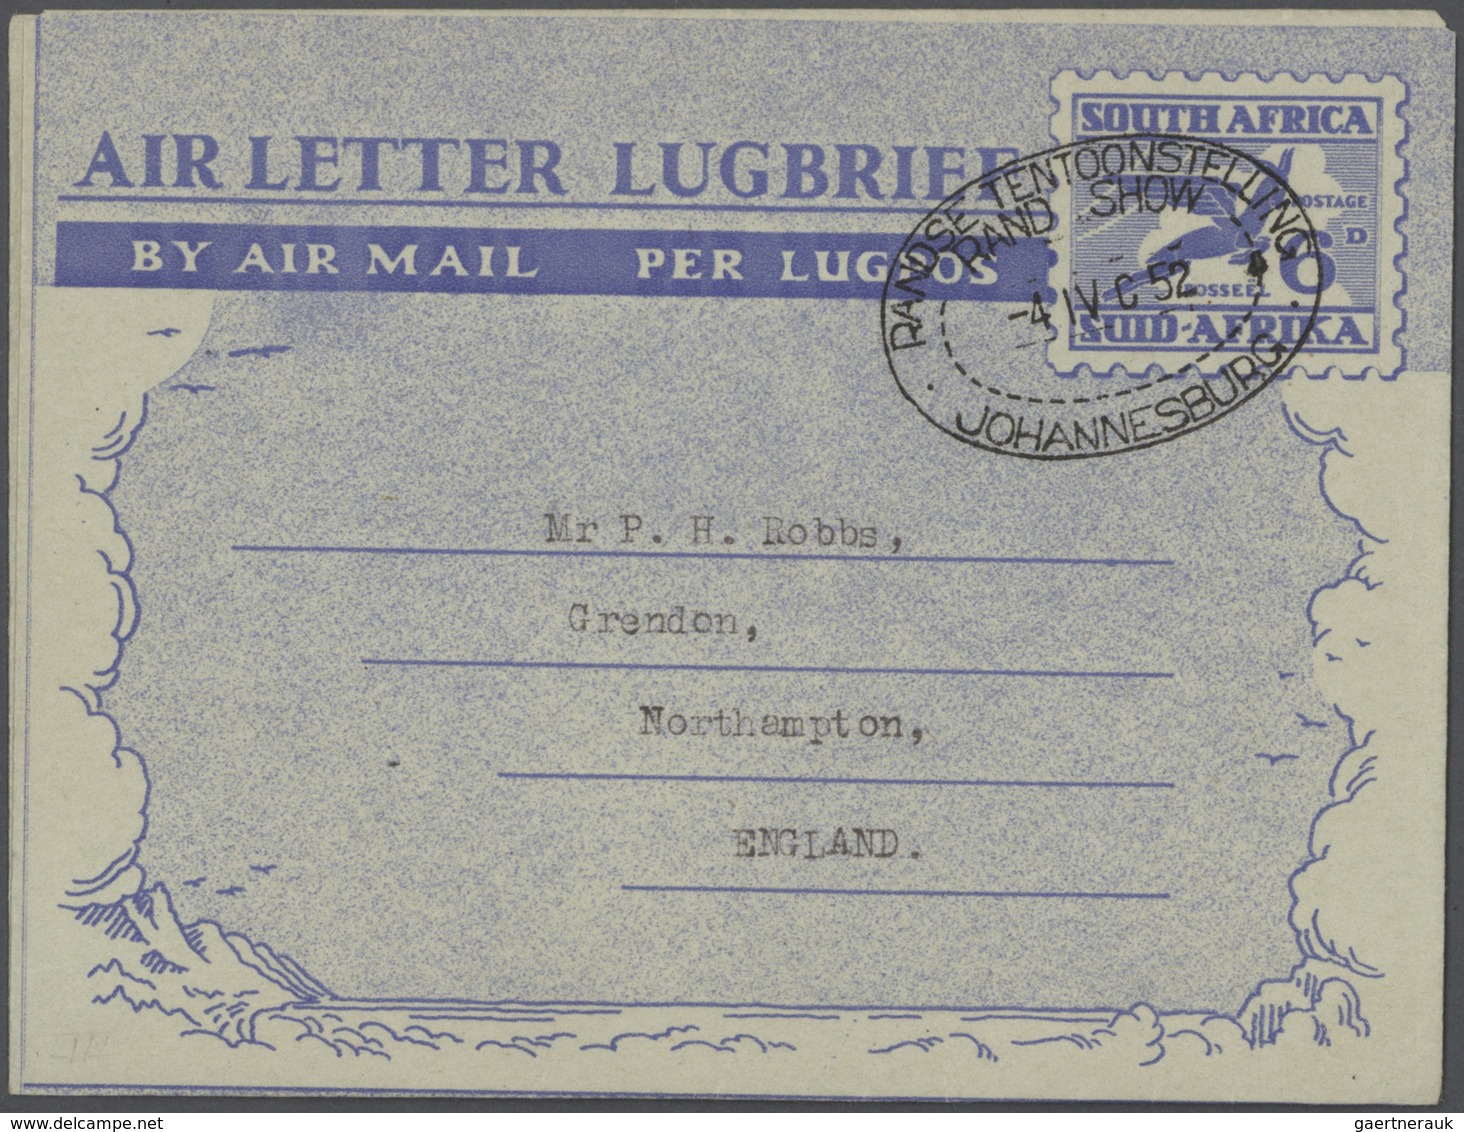 24131 Südafrika: 1945/80 (ca.), AEROGRAMMES: duplicated accumulation of about 280 airletters, lettercards